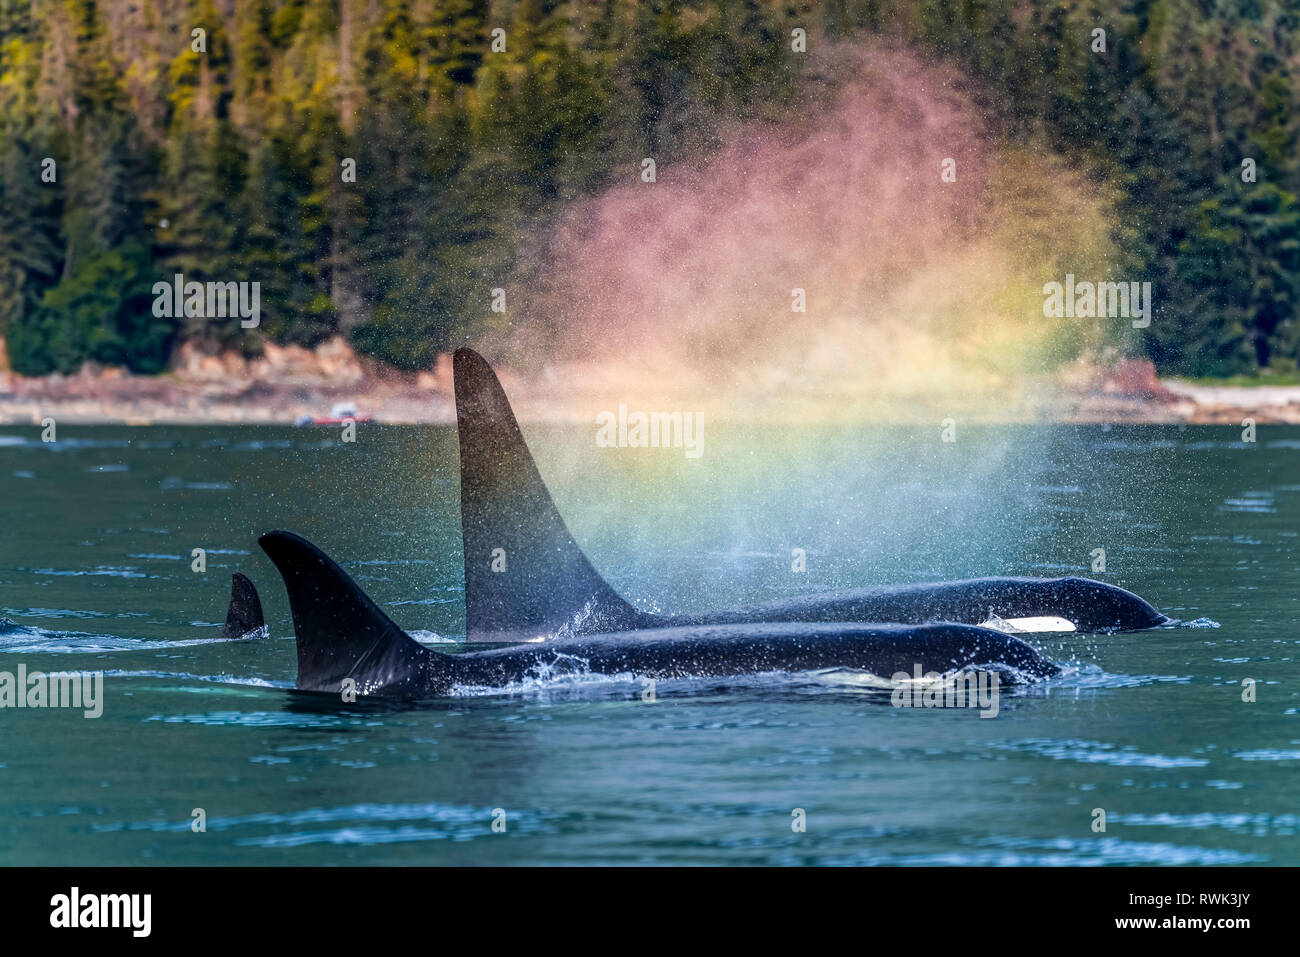 Orcas (Orcinus orca), also known as a Killer Whales, surface in Chatham Strait, a 'rainbow' forms in the blow as they exhale, Inside Passage Stock Photo